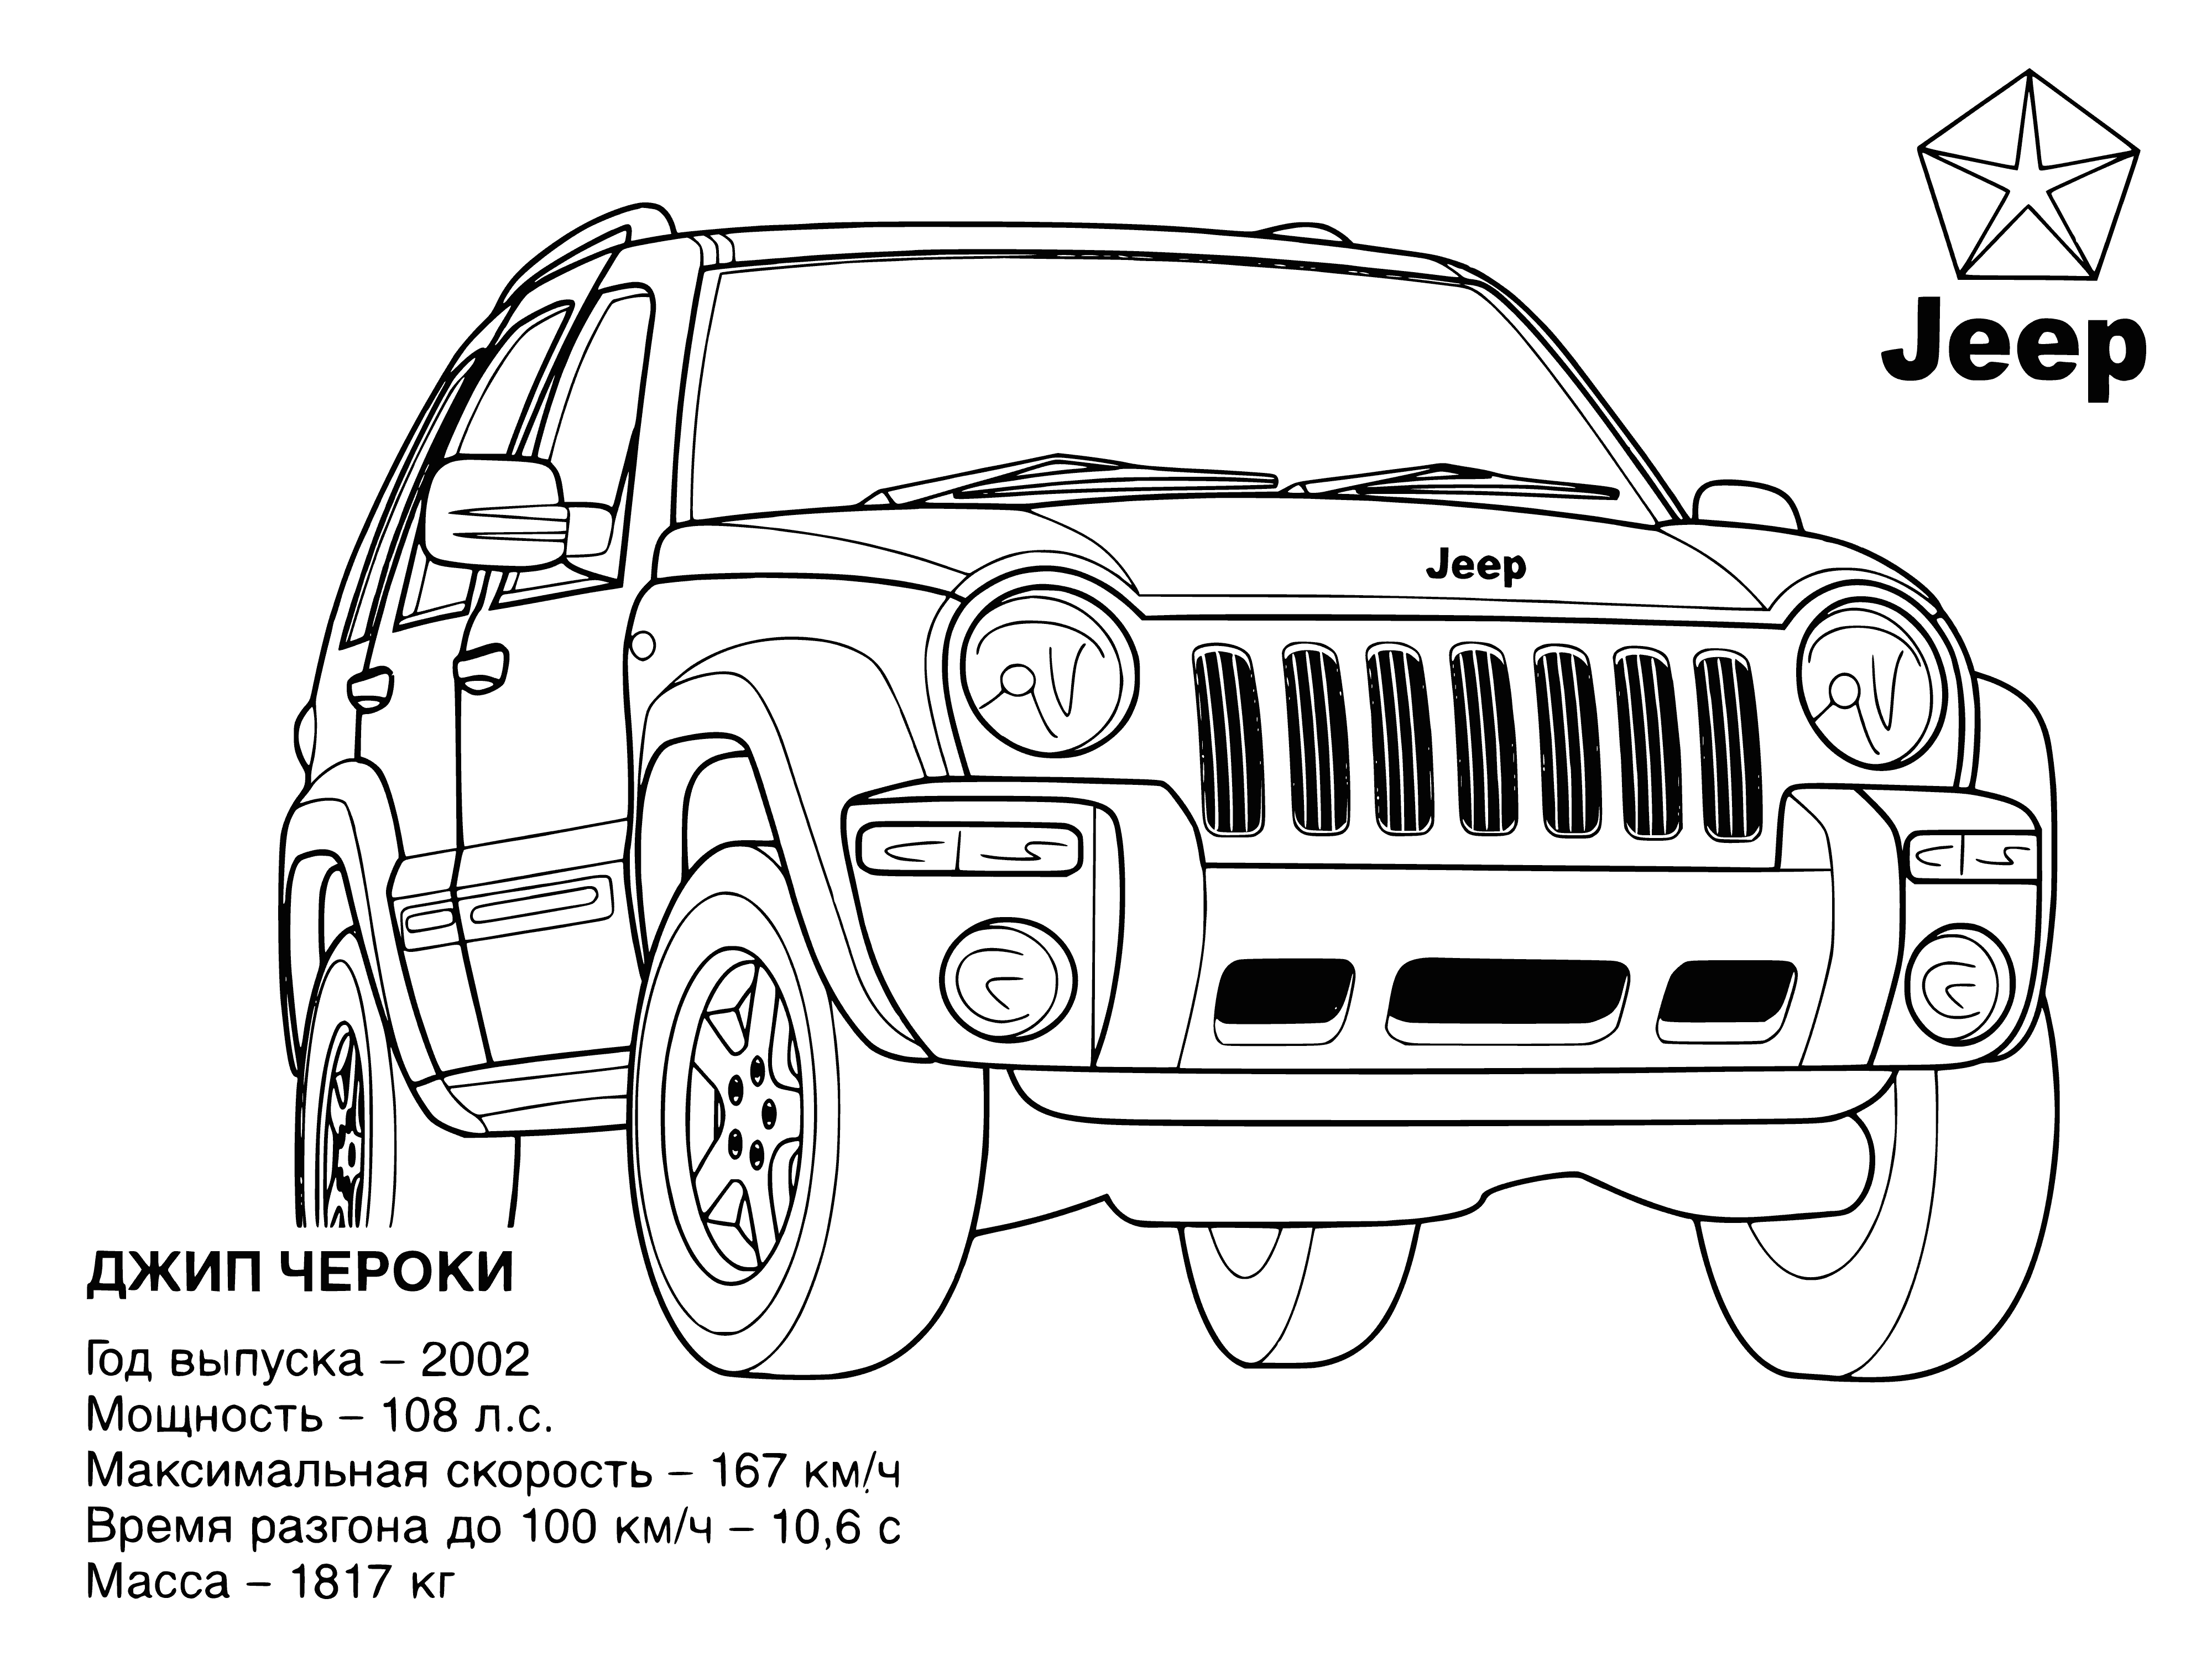 coloring page: A blue Jeep w/ white top & tan interior, 4 doors, rear hatch & luggage rack. Parked in a grassy area with trees & mountains in bg.